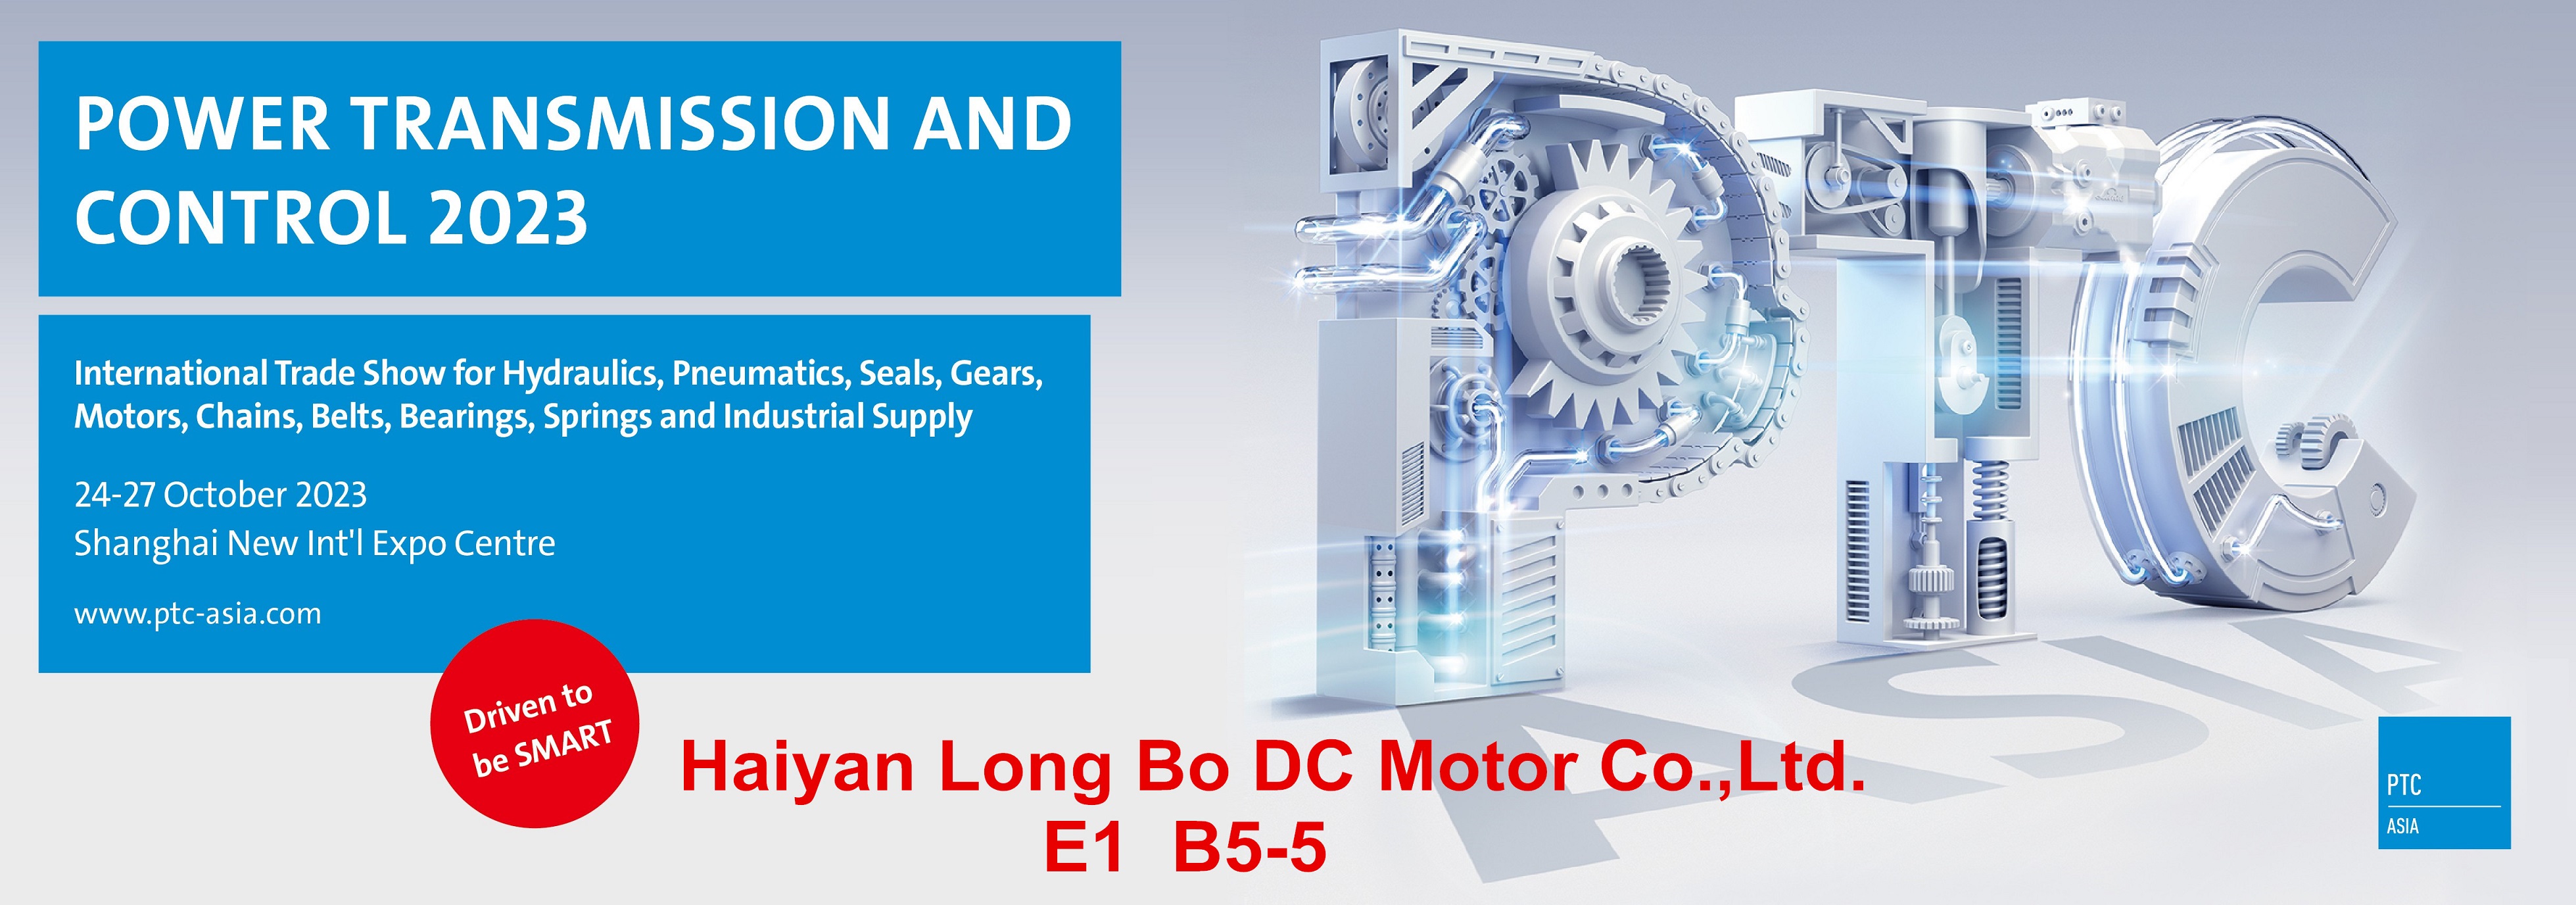 Haiyan Long Bo DC Motor Co., Ltd. will participate in PTC Asia exhibition held in Shanghai in October 2023.